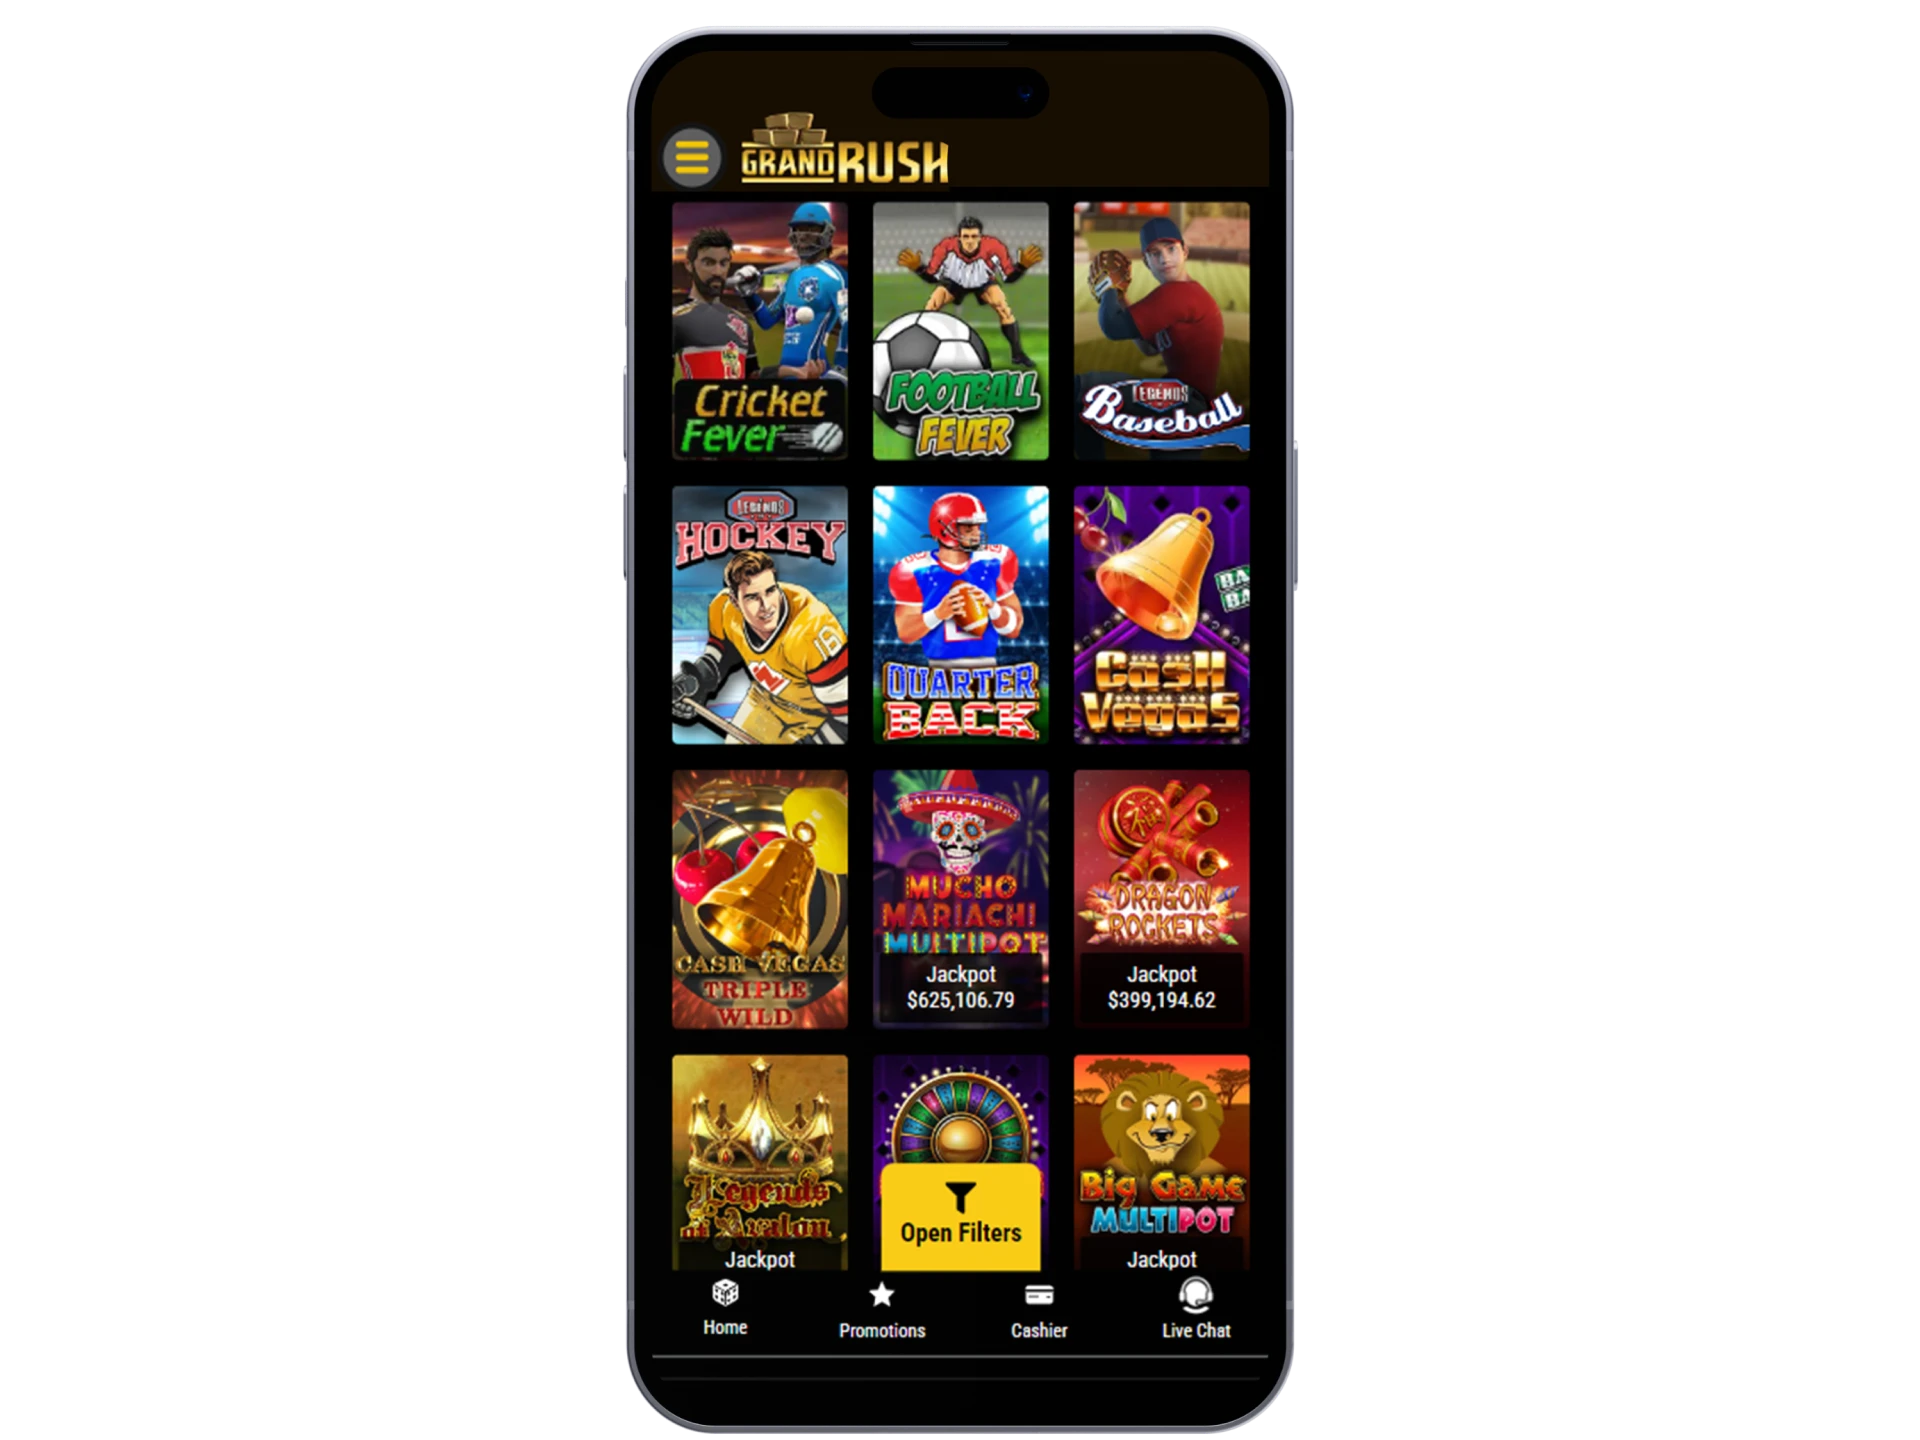 After registration, you can play games on the Grand Rush mobile version on your iOS phone.